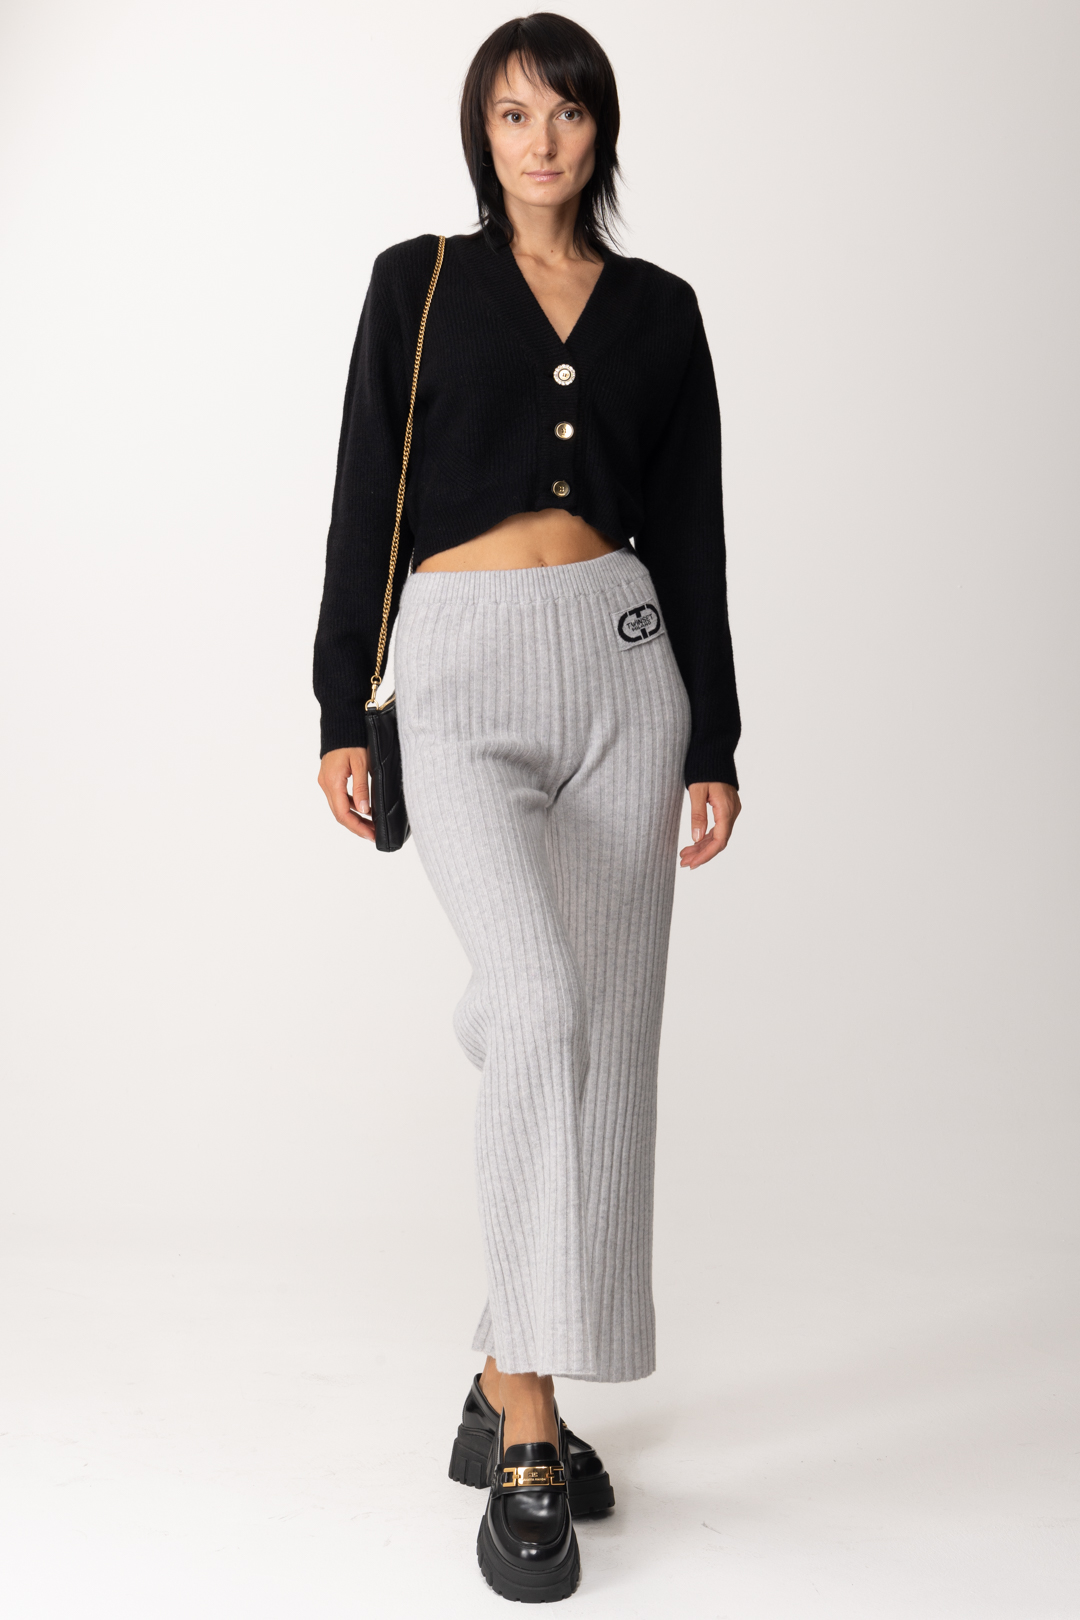 Preview: Pinko Short Cardigan with Jewel Buttons NERO LIMOUSINE